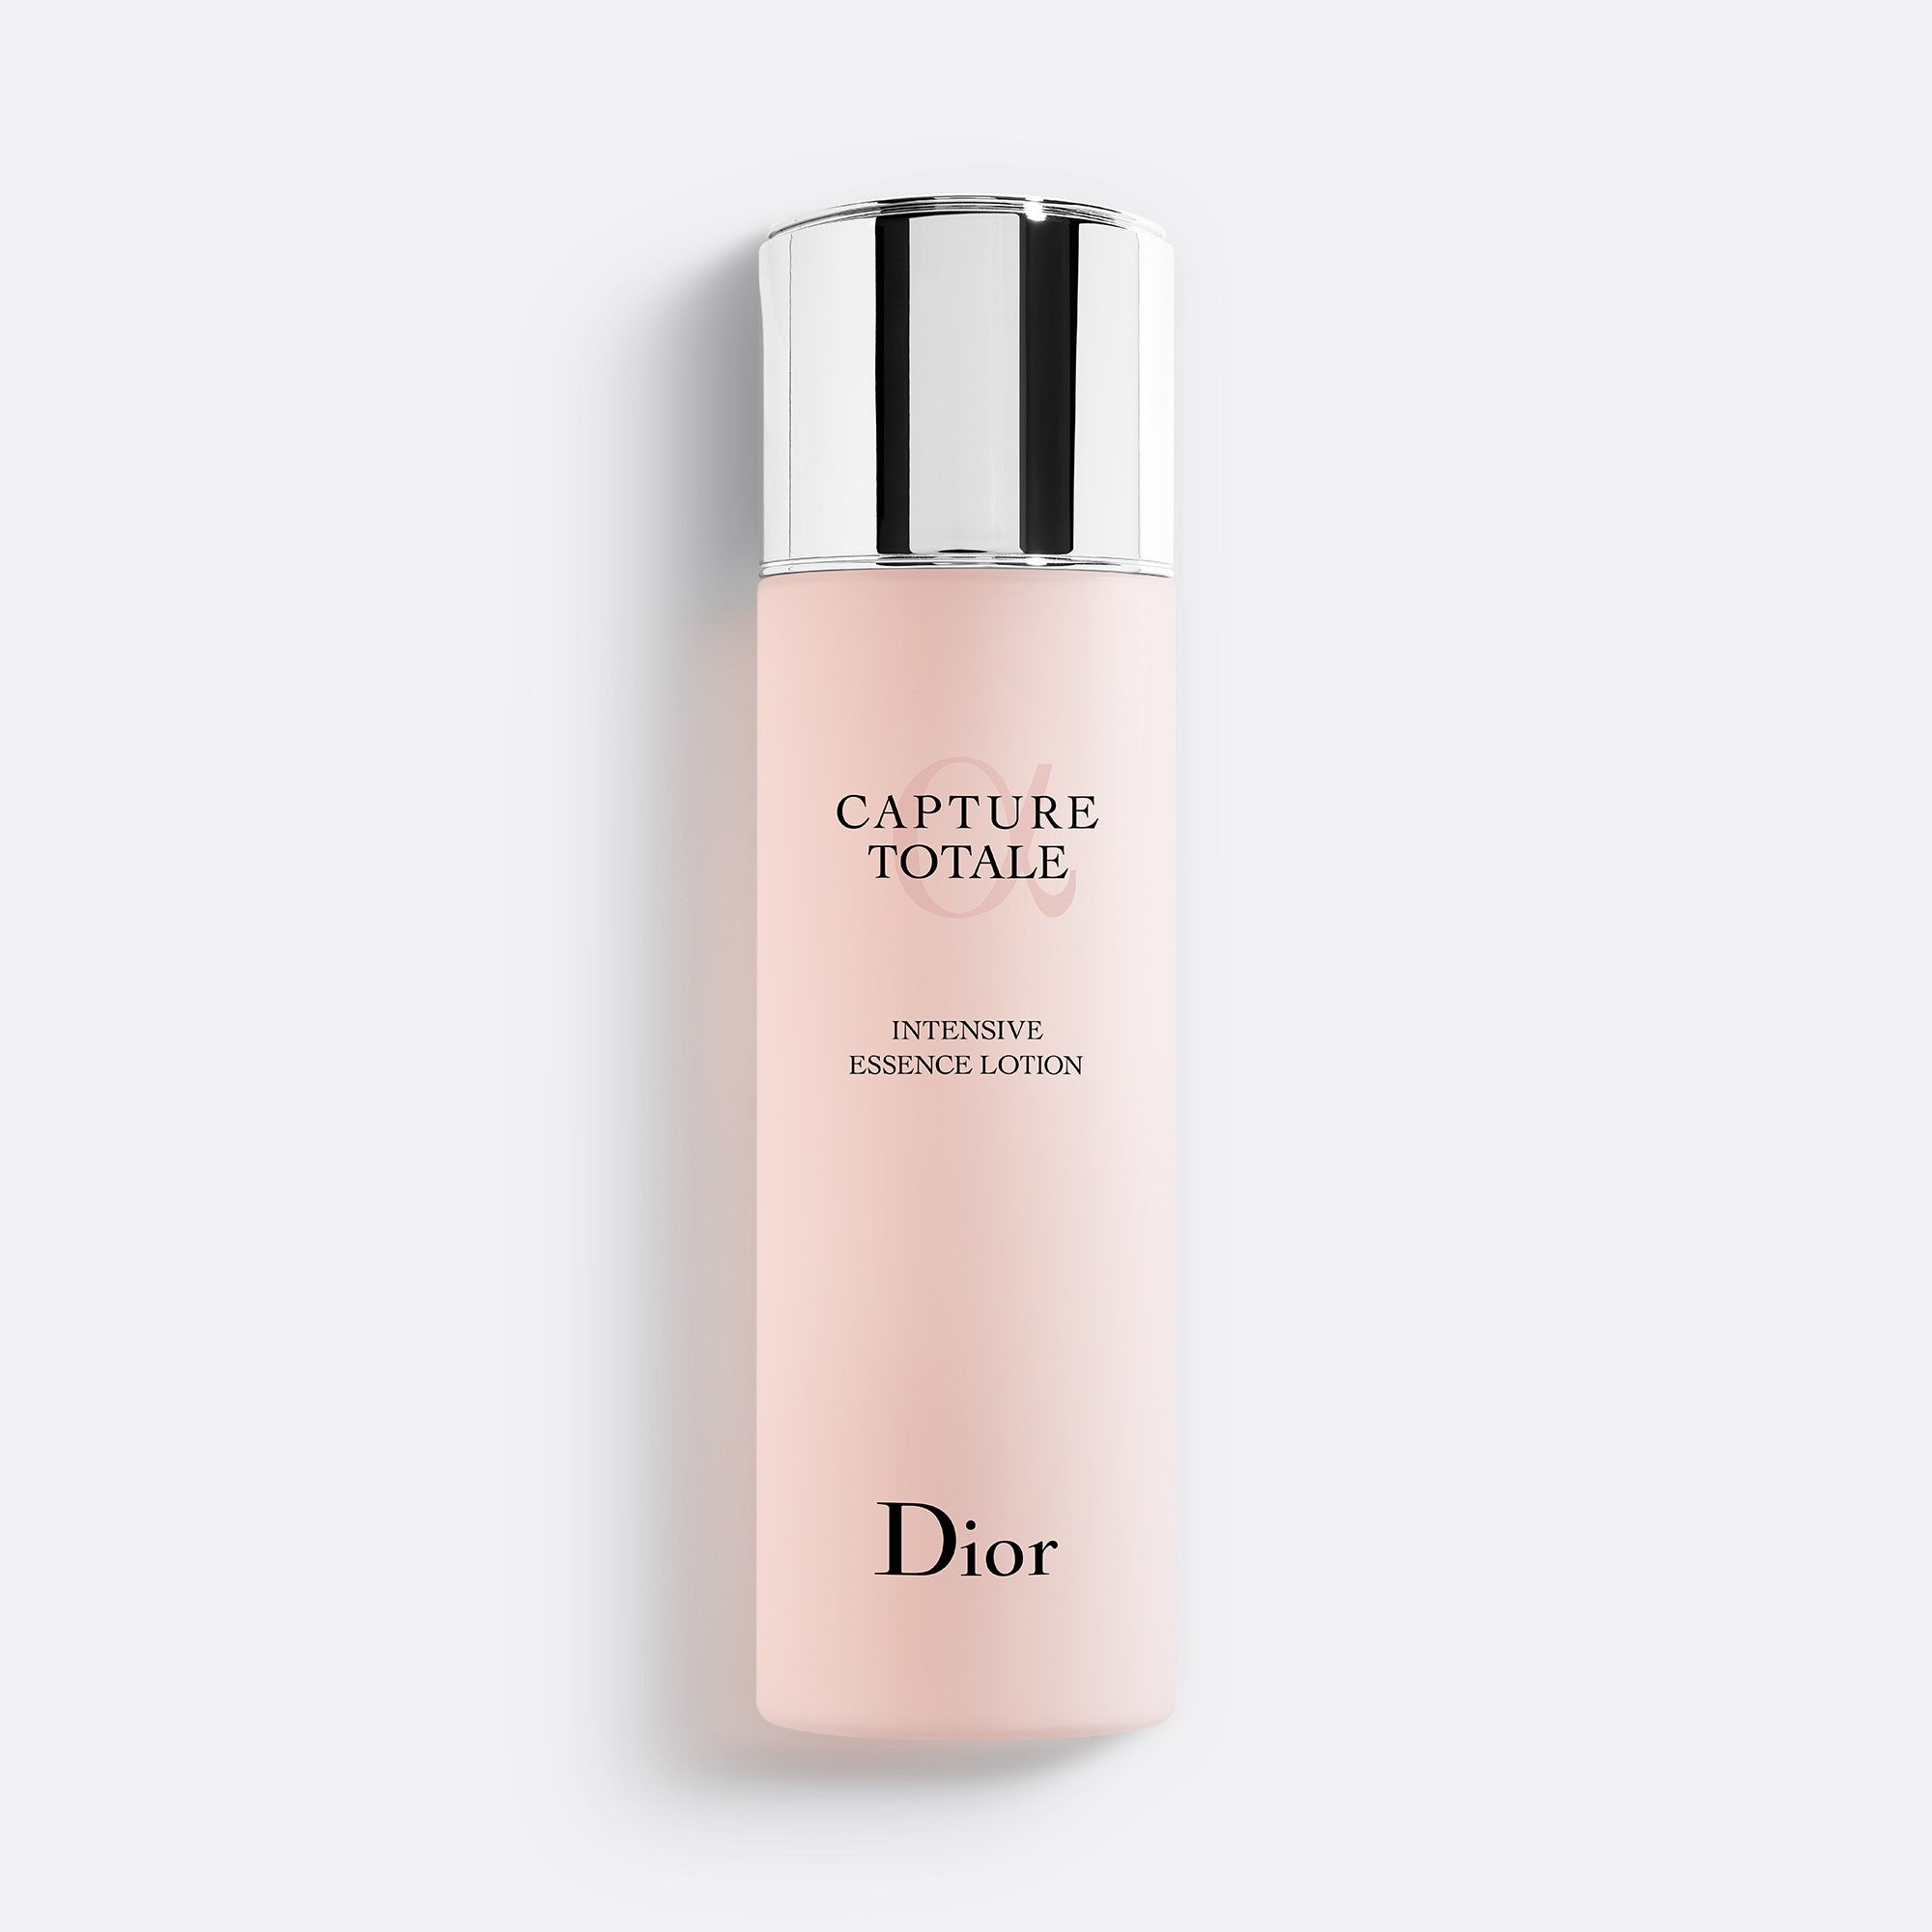 CAPTURE TOTALE INTENSIVE ESSENCE LOTION ~ Face Lotion - Intense Preparation - Radiance and Strengthened Skin Barrier